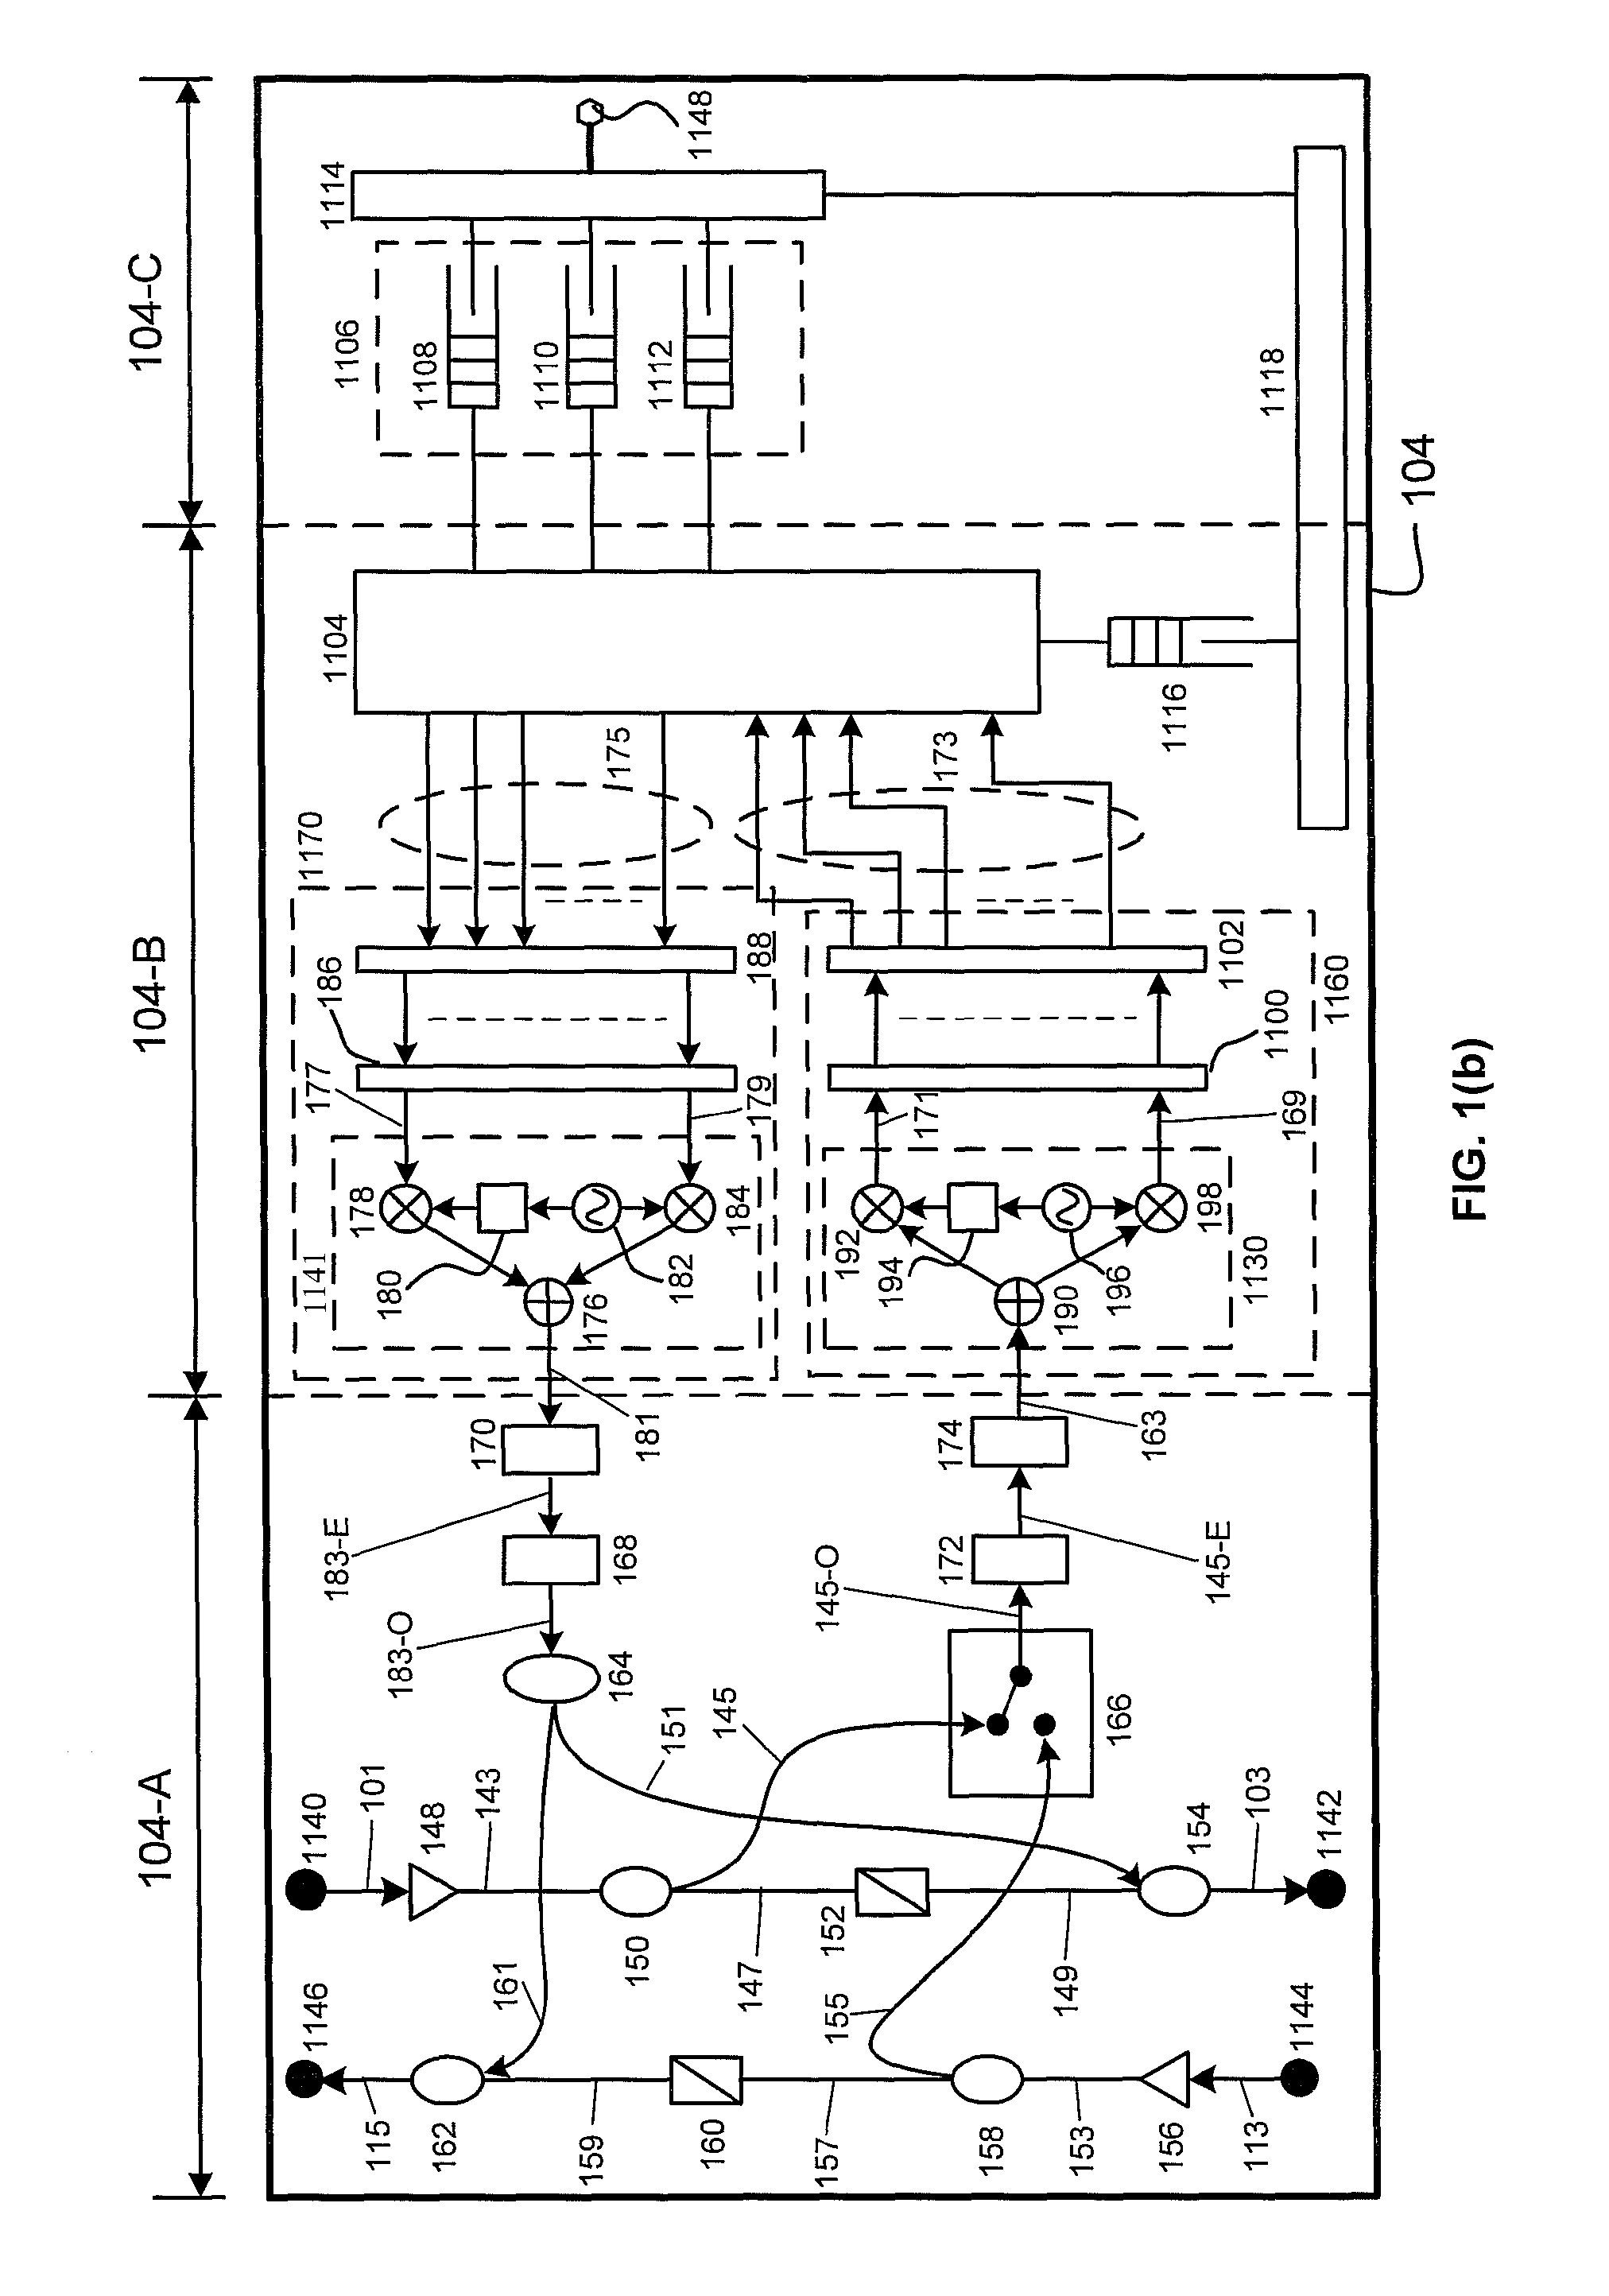 Orthogonal frequency division multiple access based optical ring network